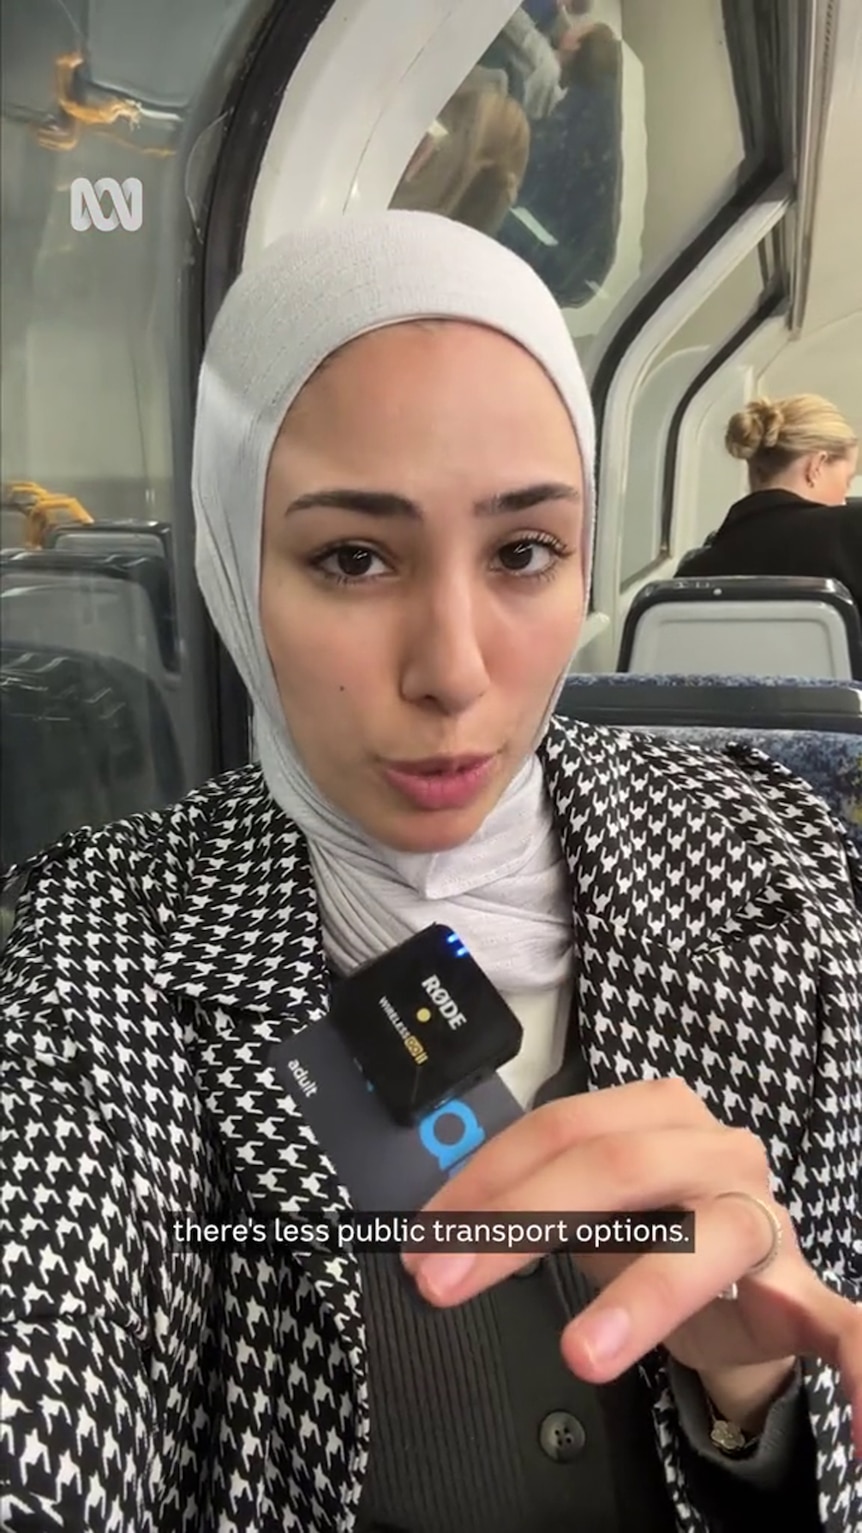 A young woman in a hijab with medium-tone skin sits inside a train with another passenger in the background